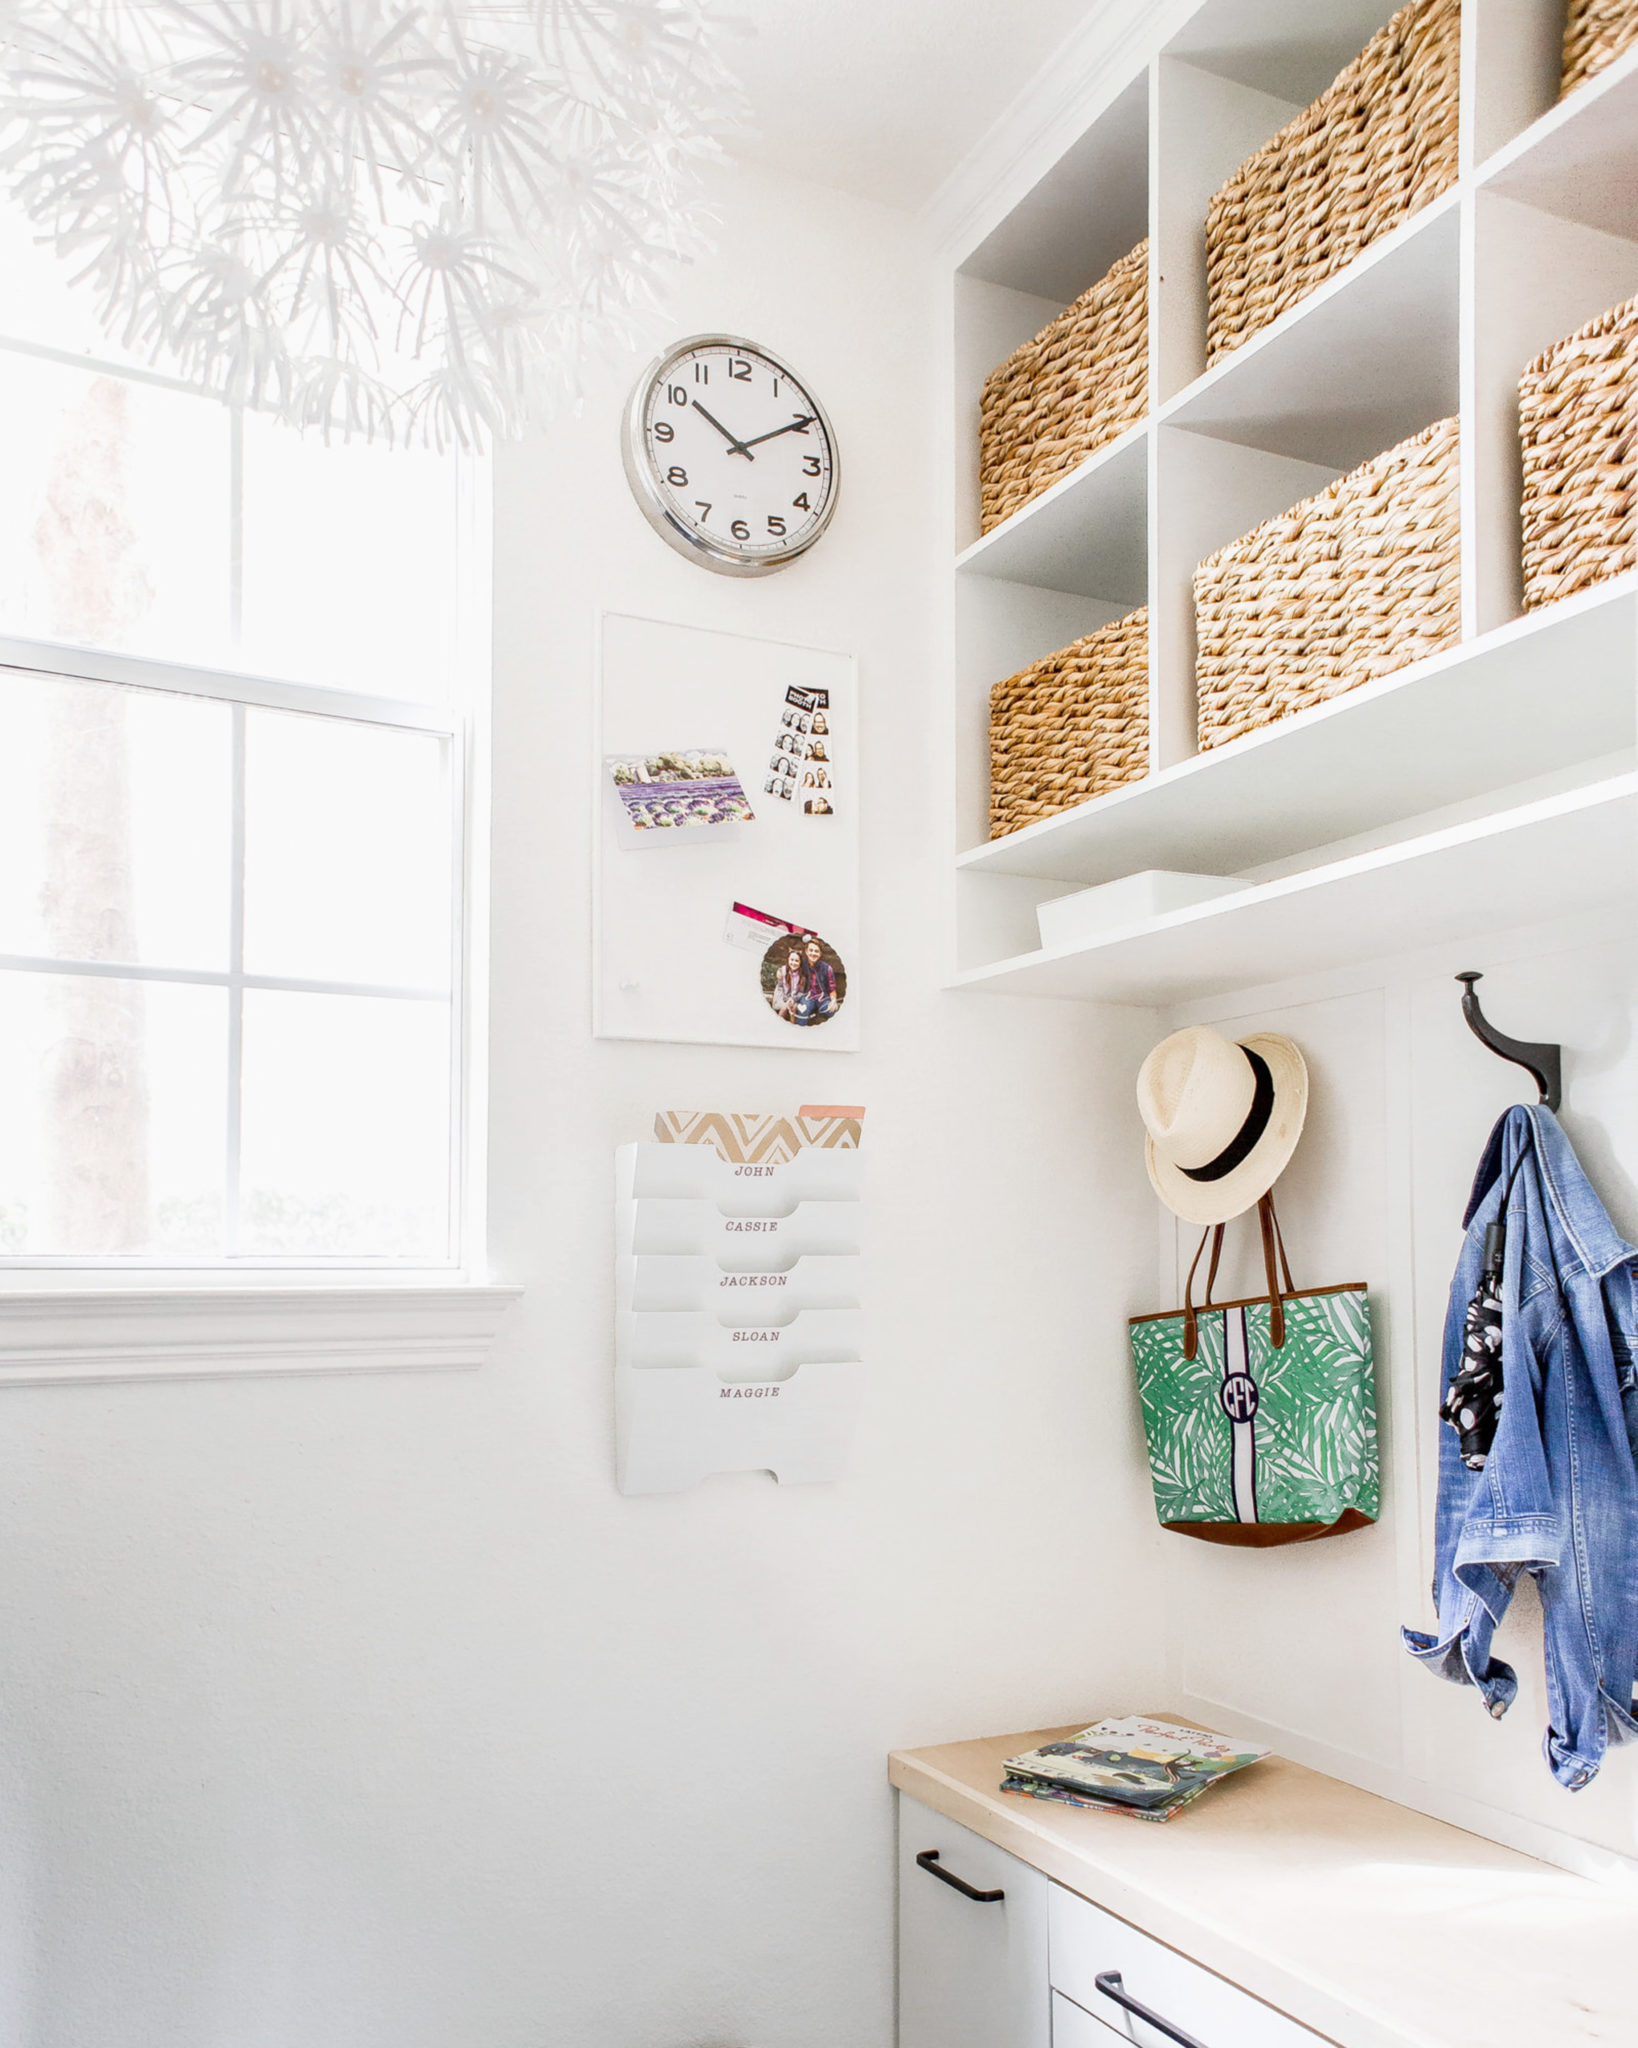 Entryway with hooks, clock, and paper storage